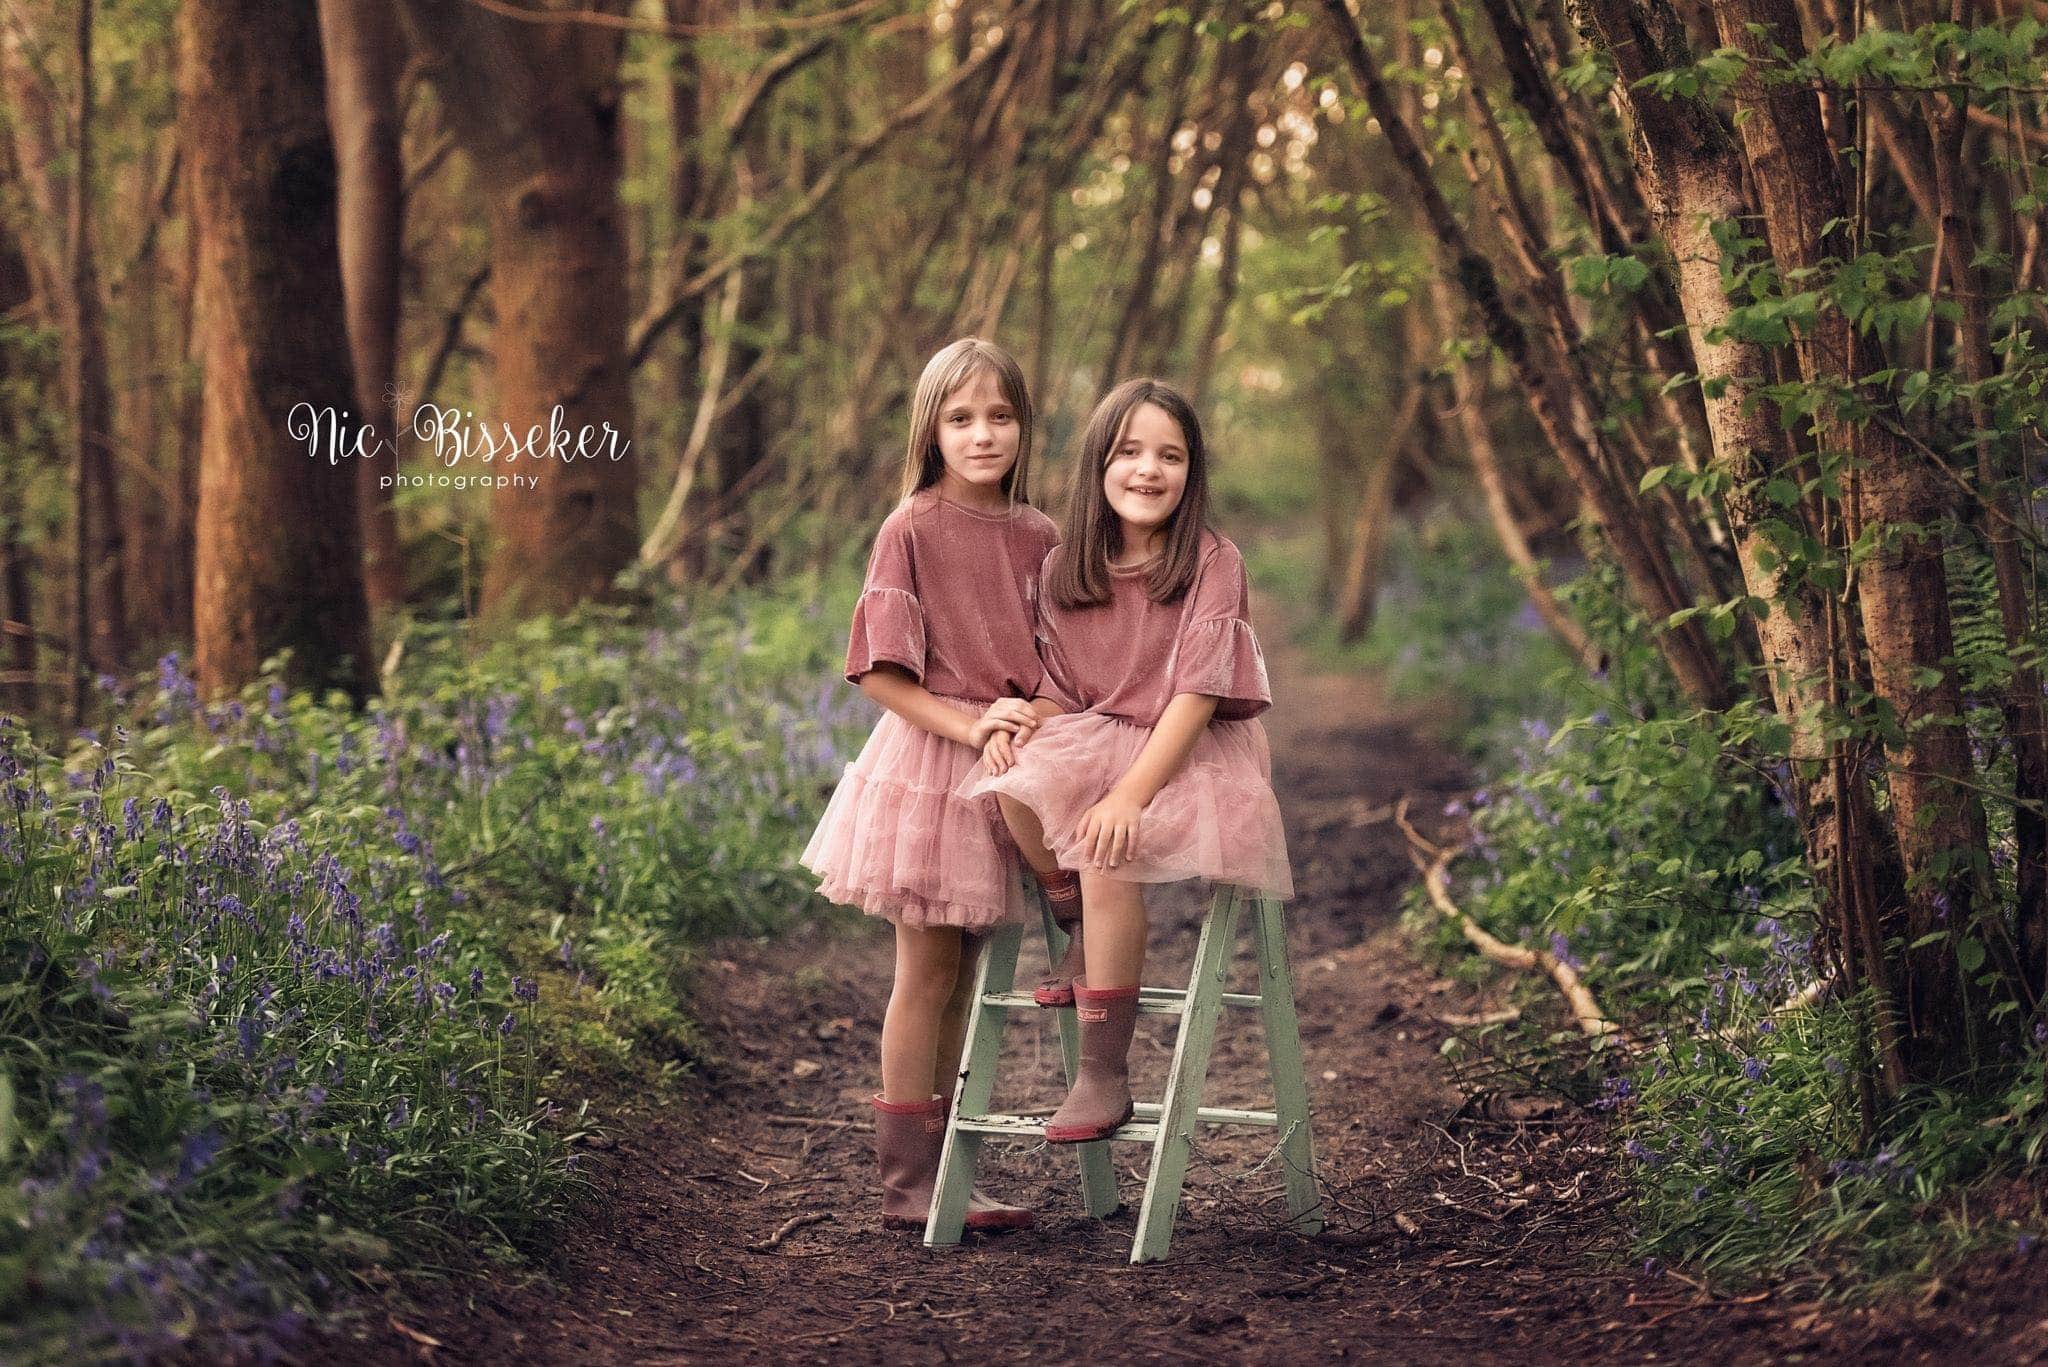 Nic Bisseker photography bluebell mini session kent sussex surrey